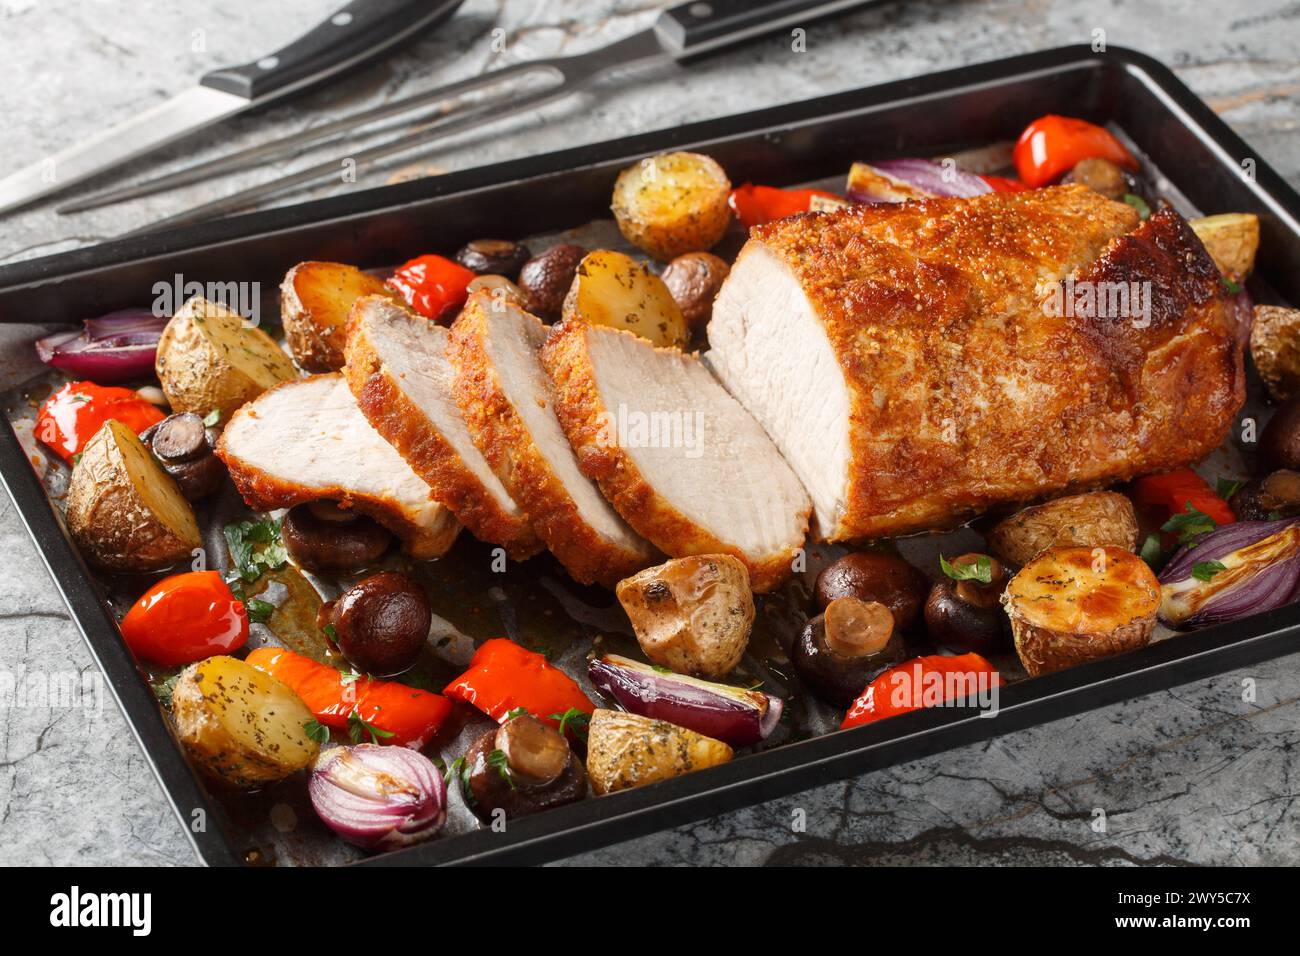 Delicious festive baked pork loin with vegetables and mushrooms close-up on a baking sheet on the table. Horizontal Stock Photo